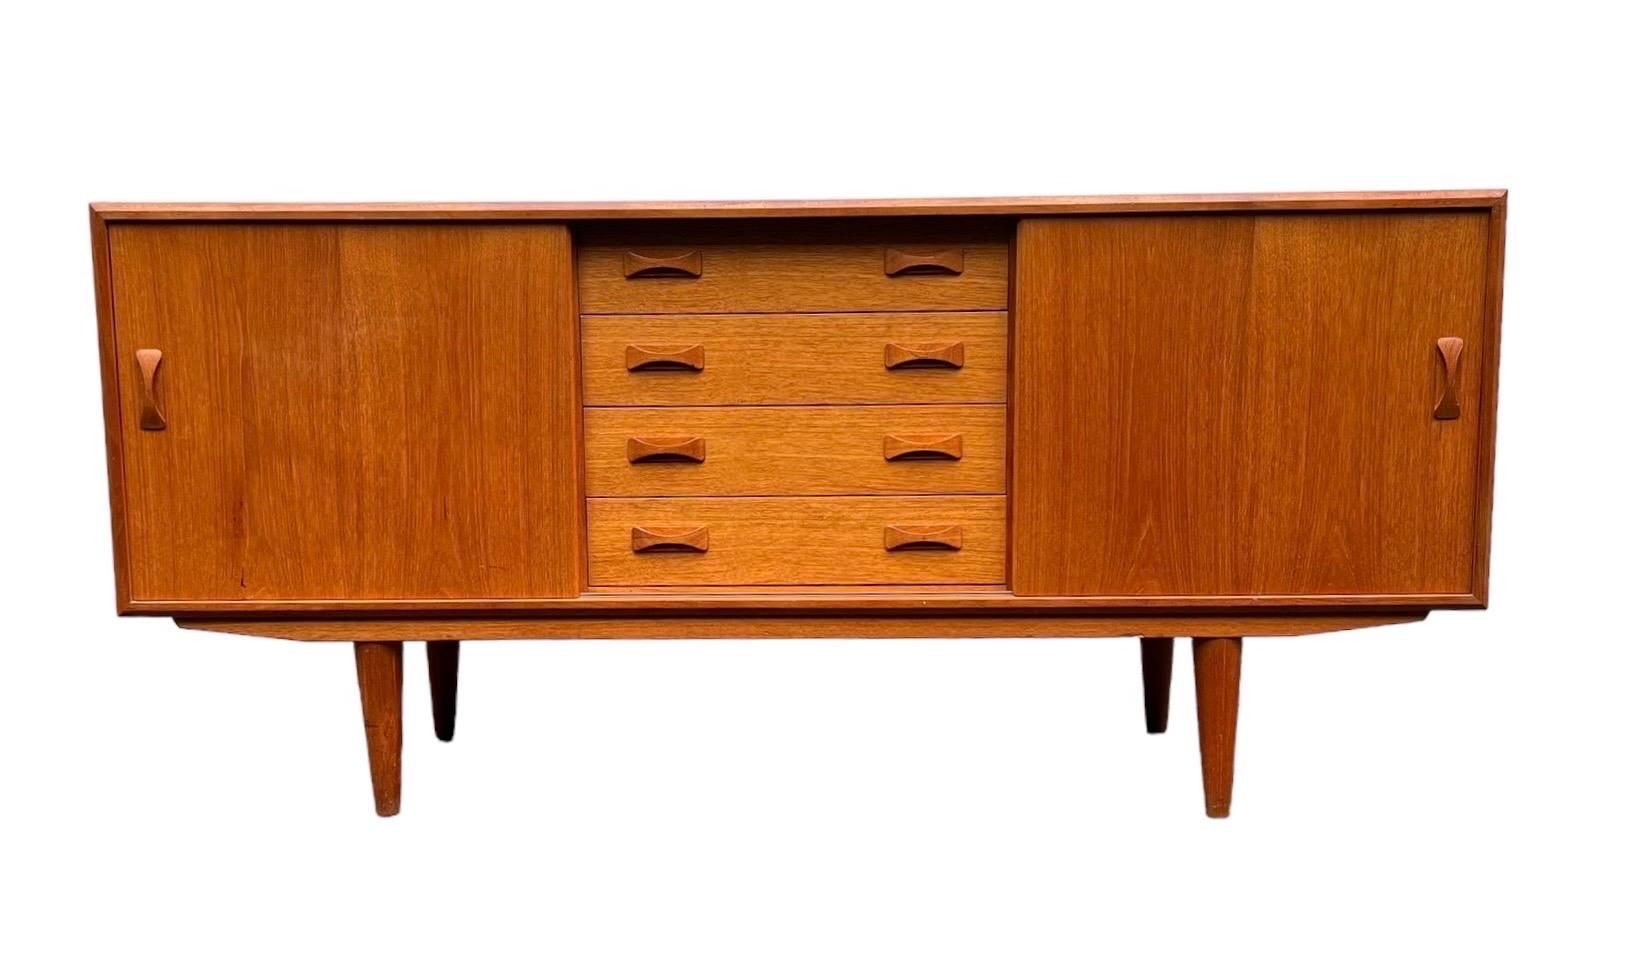 Vintage Danish Mid-Century Modern Credenza by Clausen and Sons . Dovetail Drawers. Adjustable Shelves.

Dimensions. 63 W ; 18 D ; 29 H
Right and Left Compartment. 20 D ; 16 1/2 D ; 17 1/2 H.